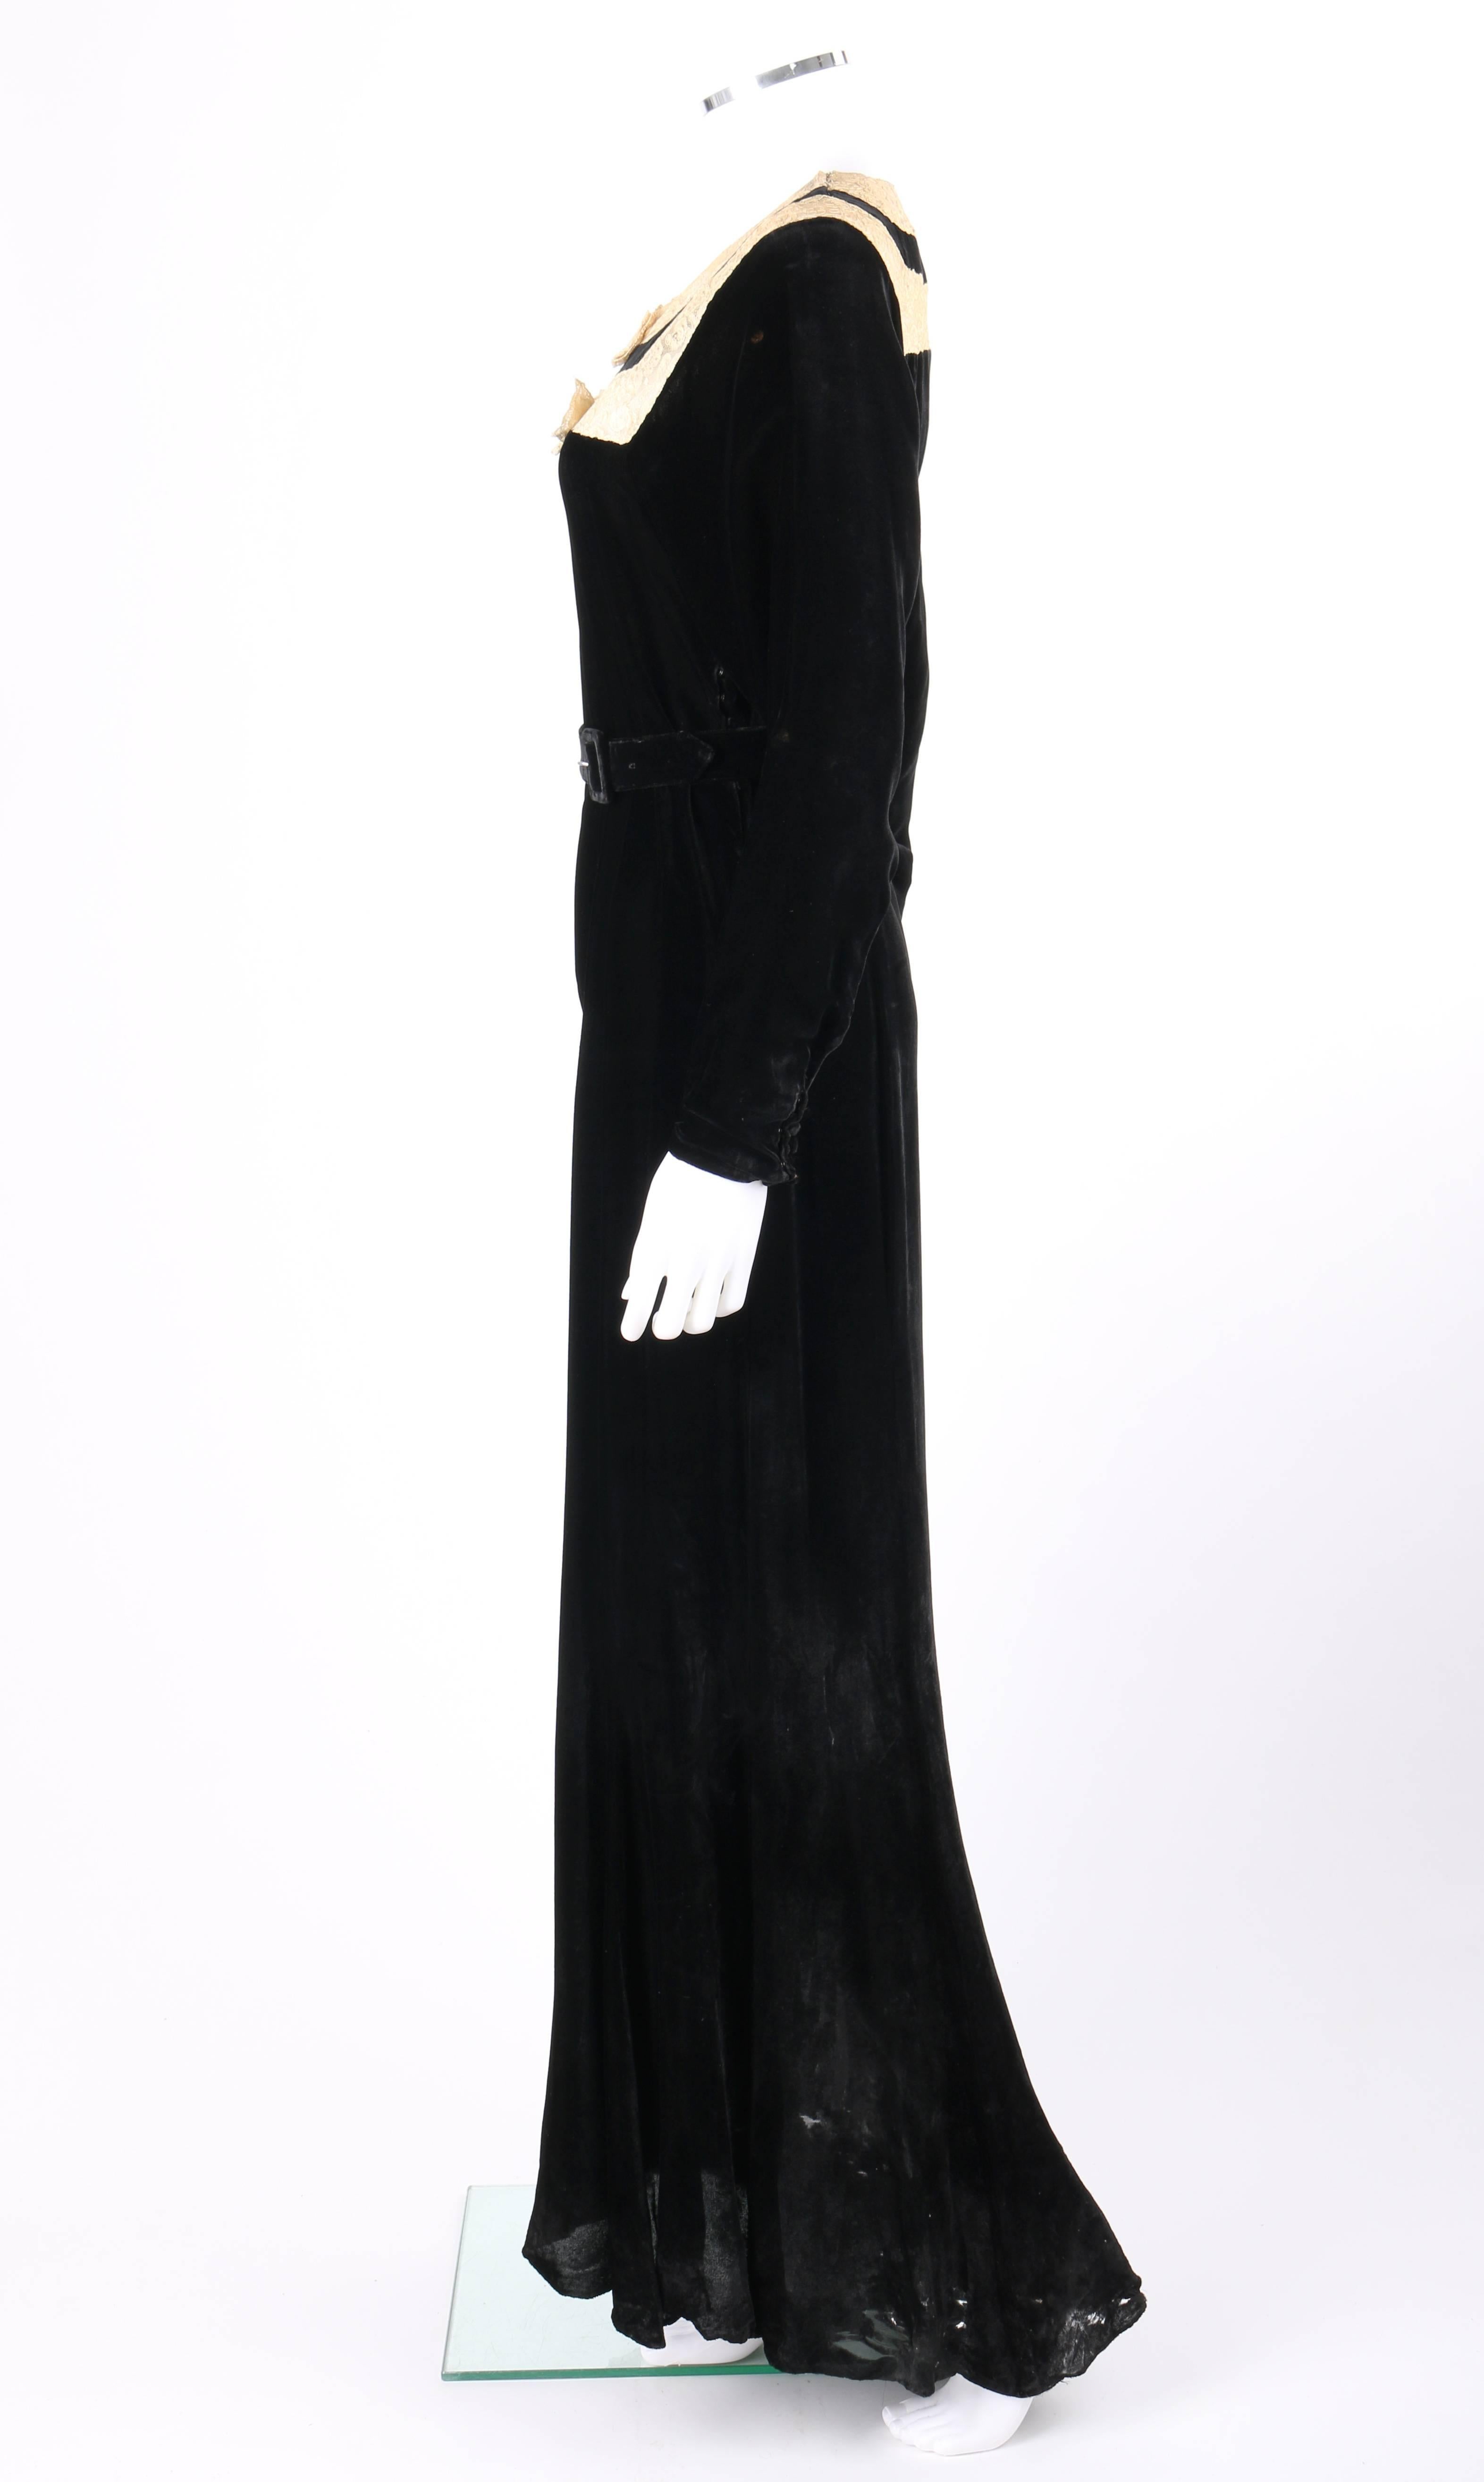 GERMAINE MONTEIL c.1930s Black Silk Velvet Belted Floral Lace Evening Dress Gown In Good Condition For Sale In Thiensville, WI